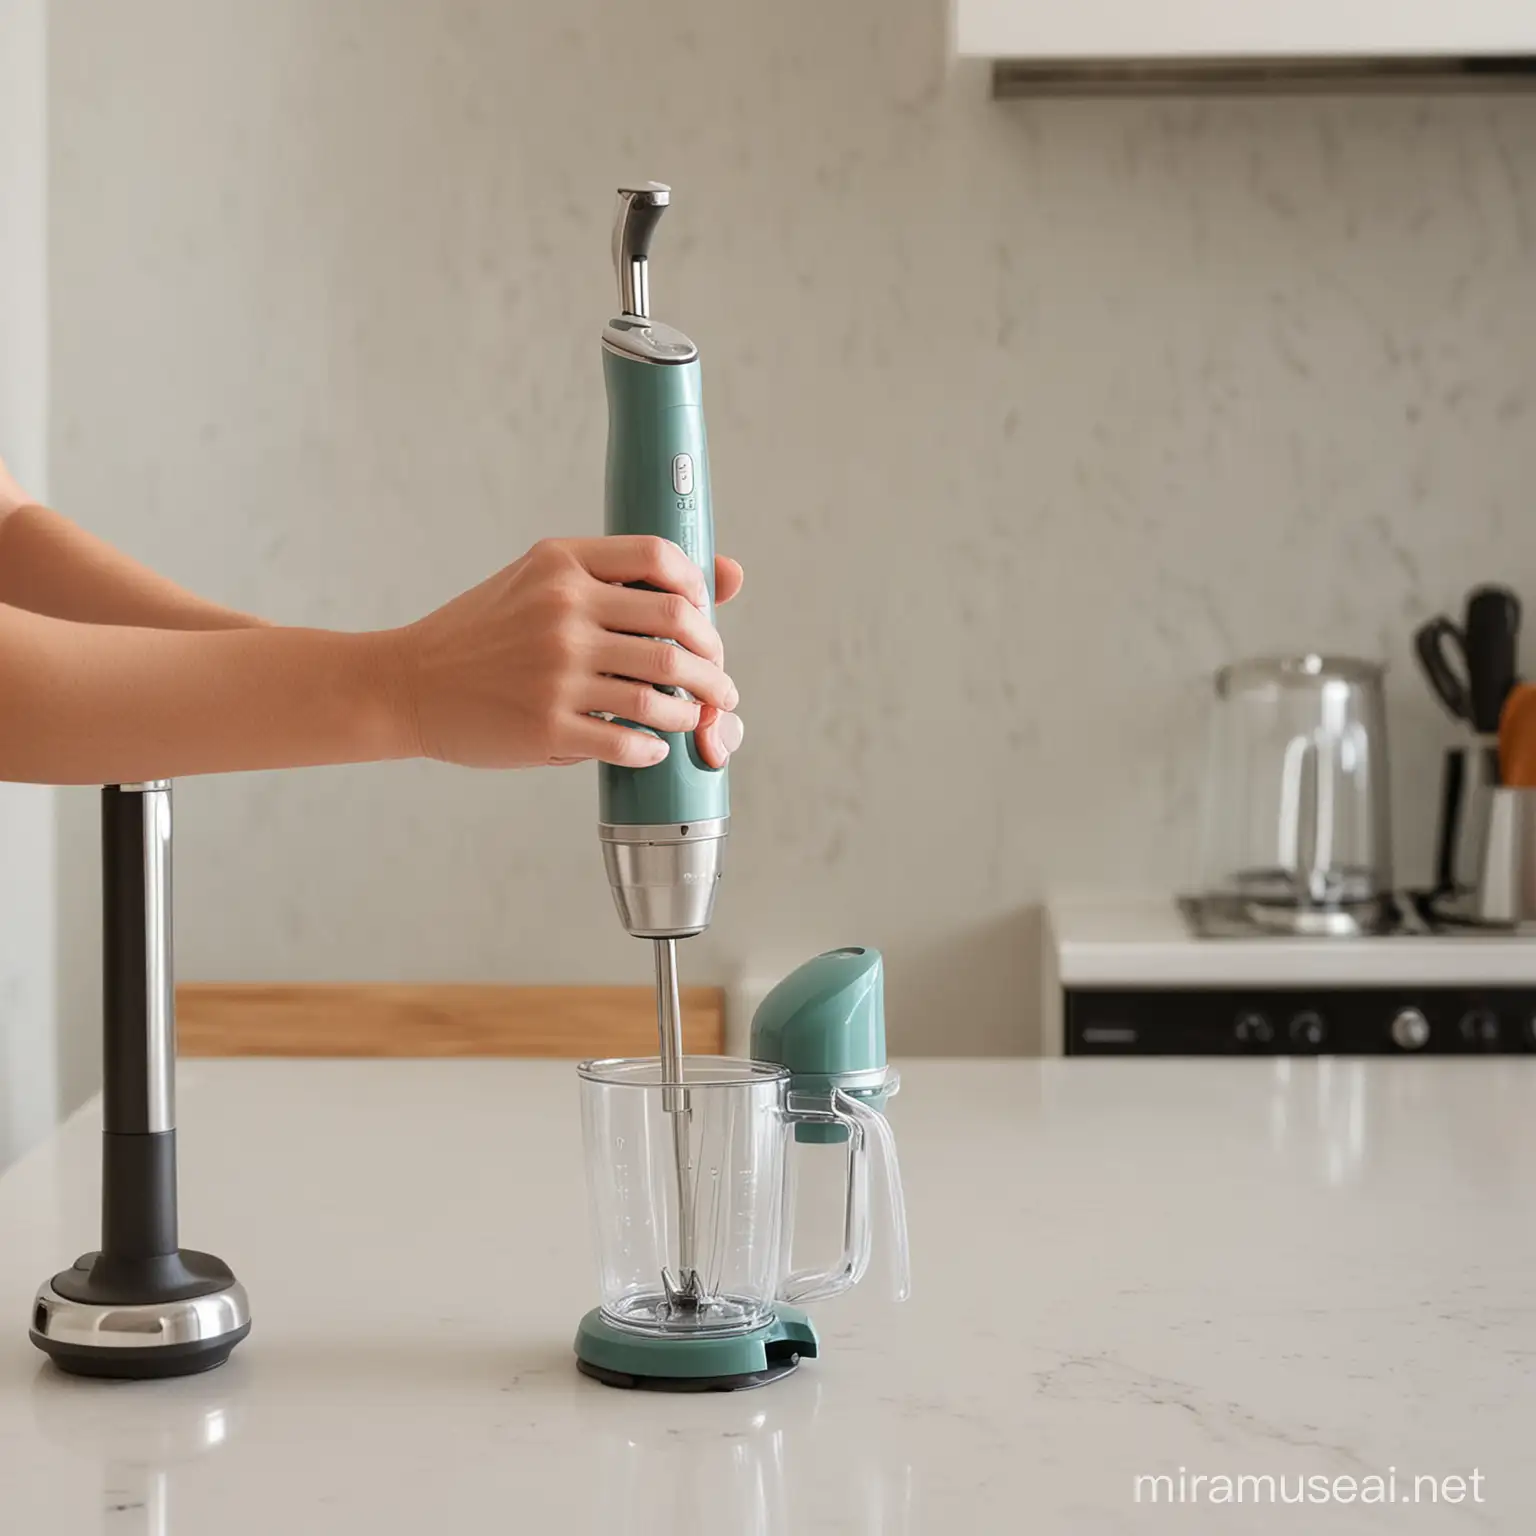 Woman Using SnapOn Stick Blender in Kitchen